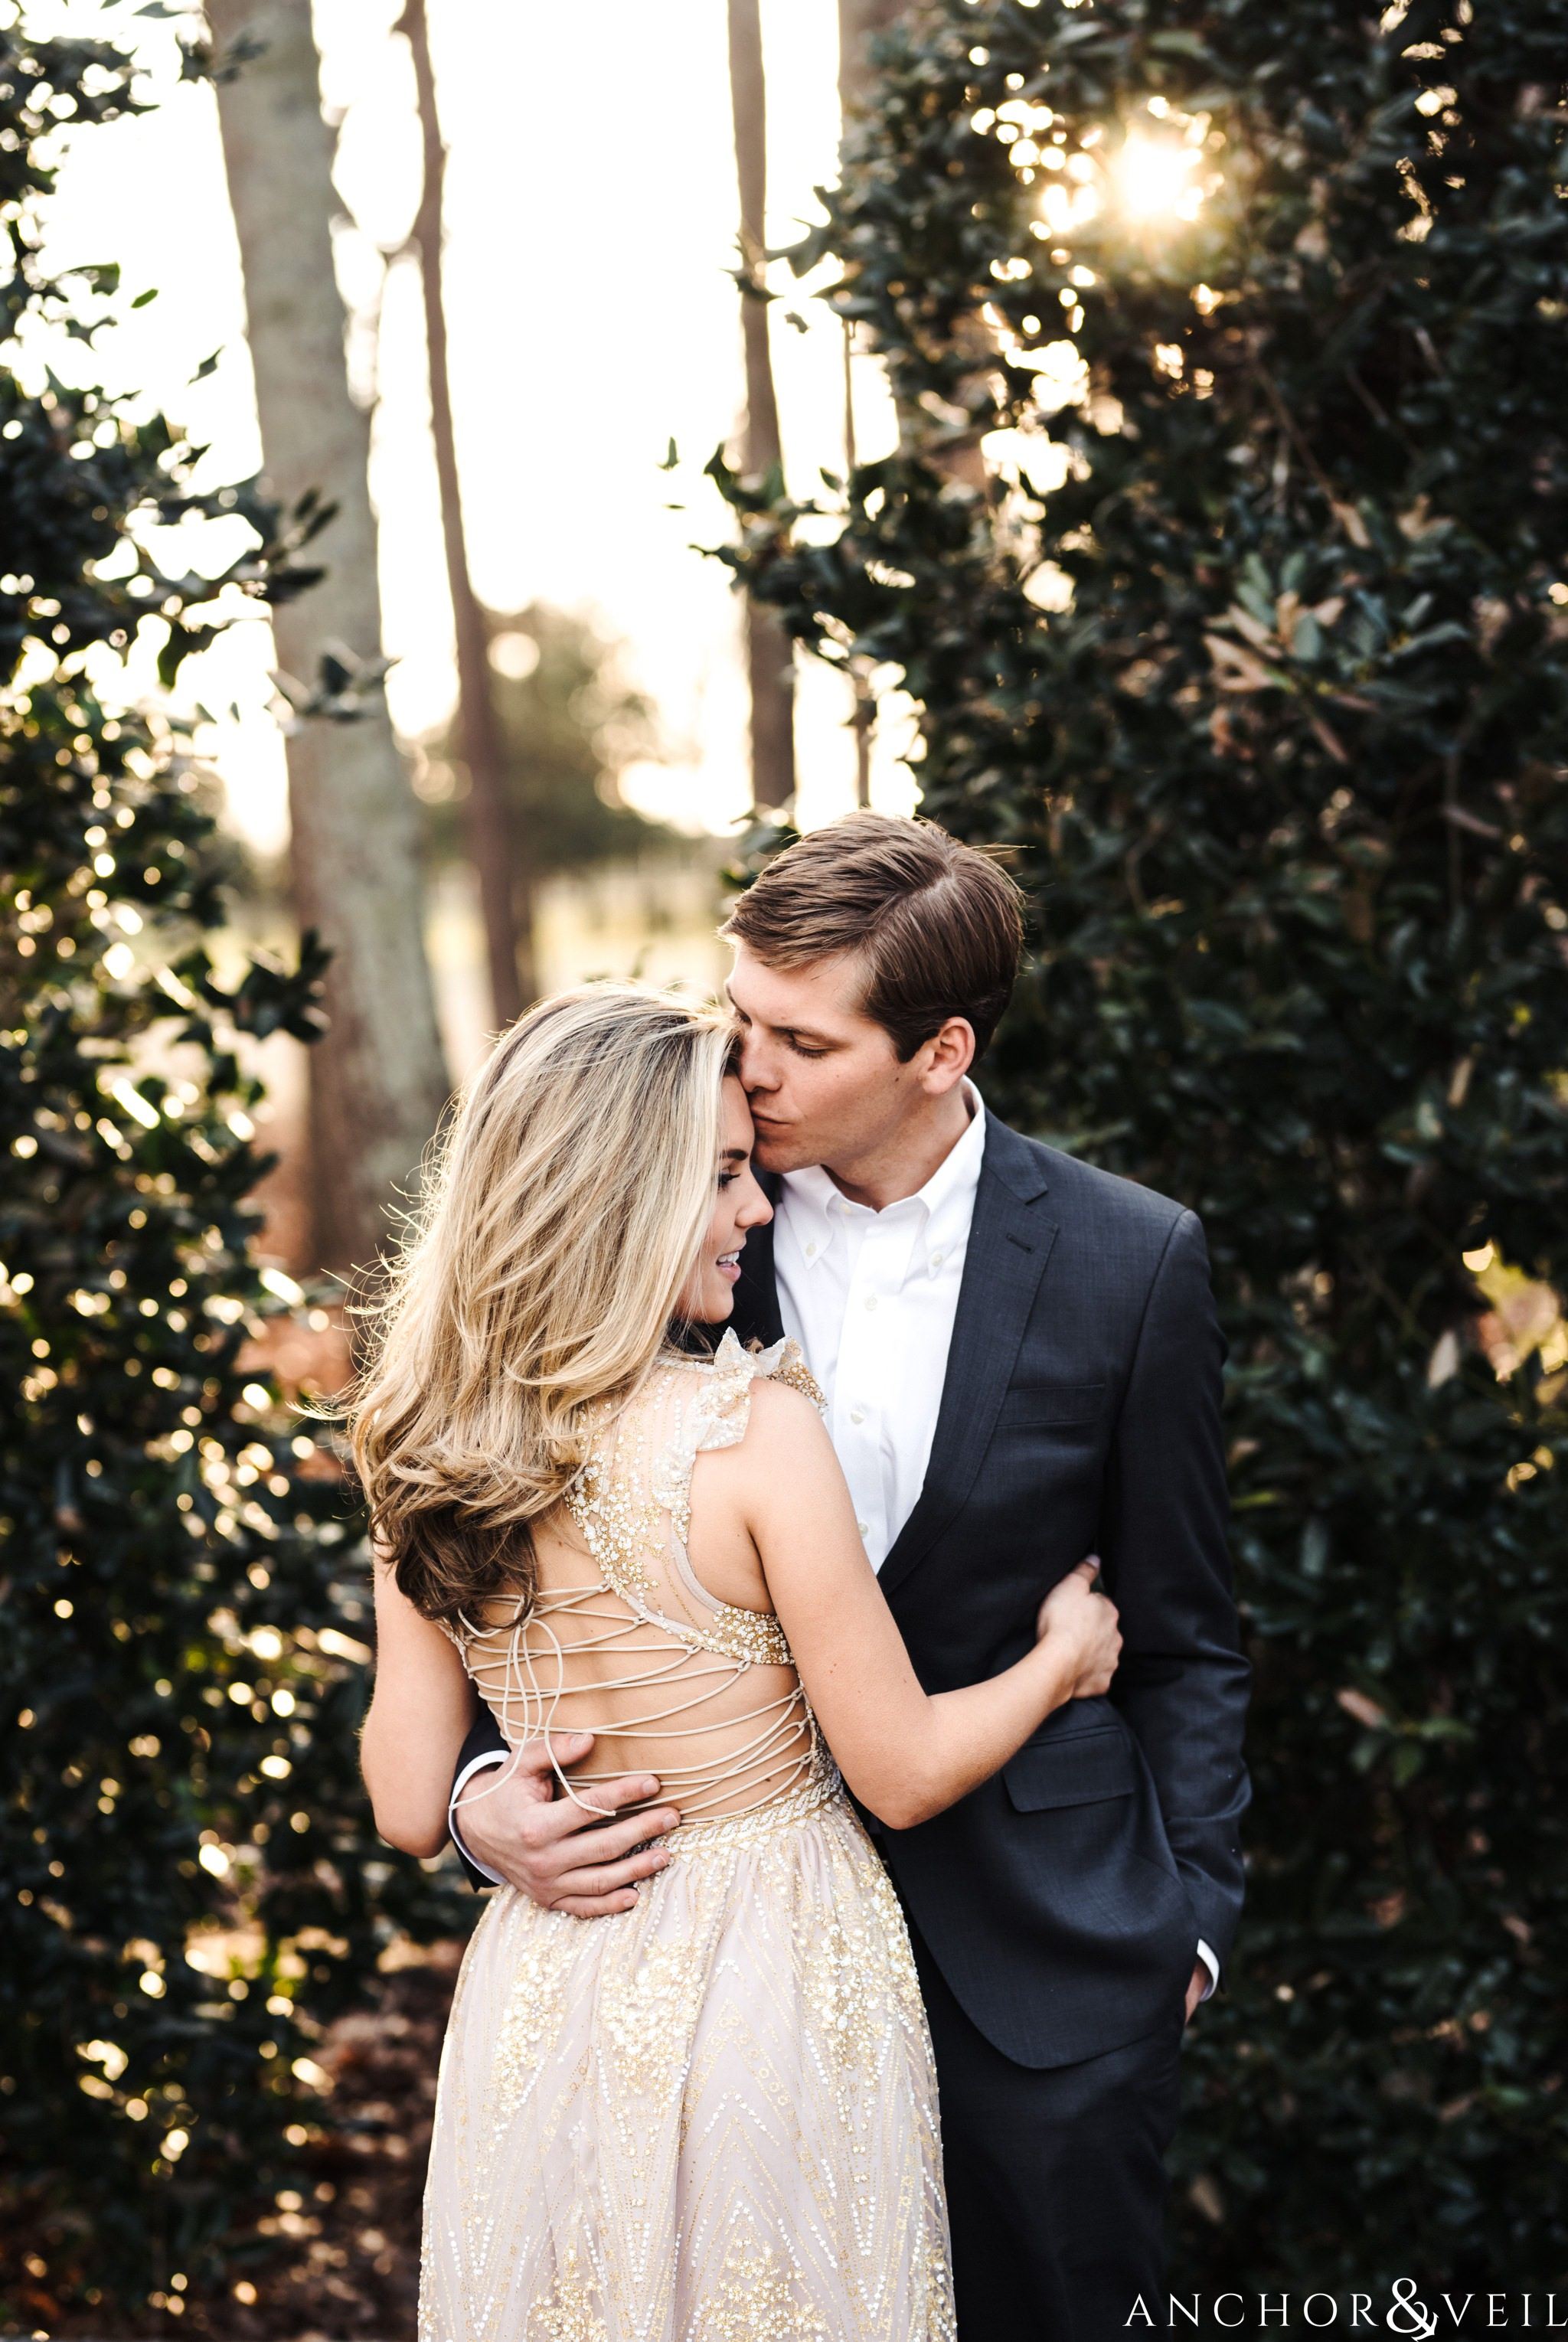 holding her tight and kissing her on the forehead during their Dale Earnhardt Inc Engagement Session Mooresville